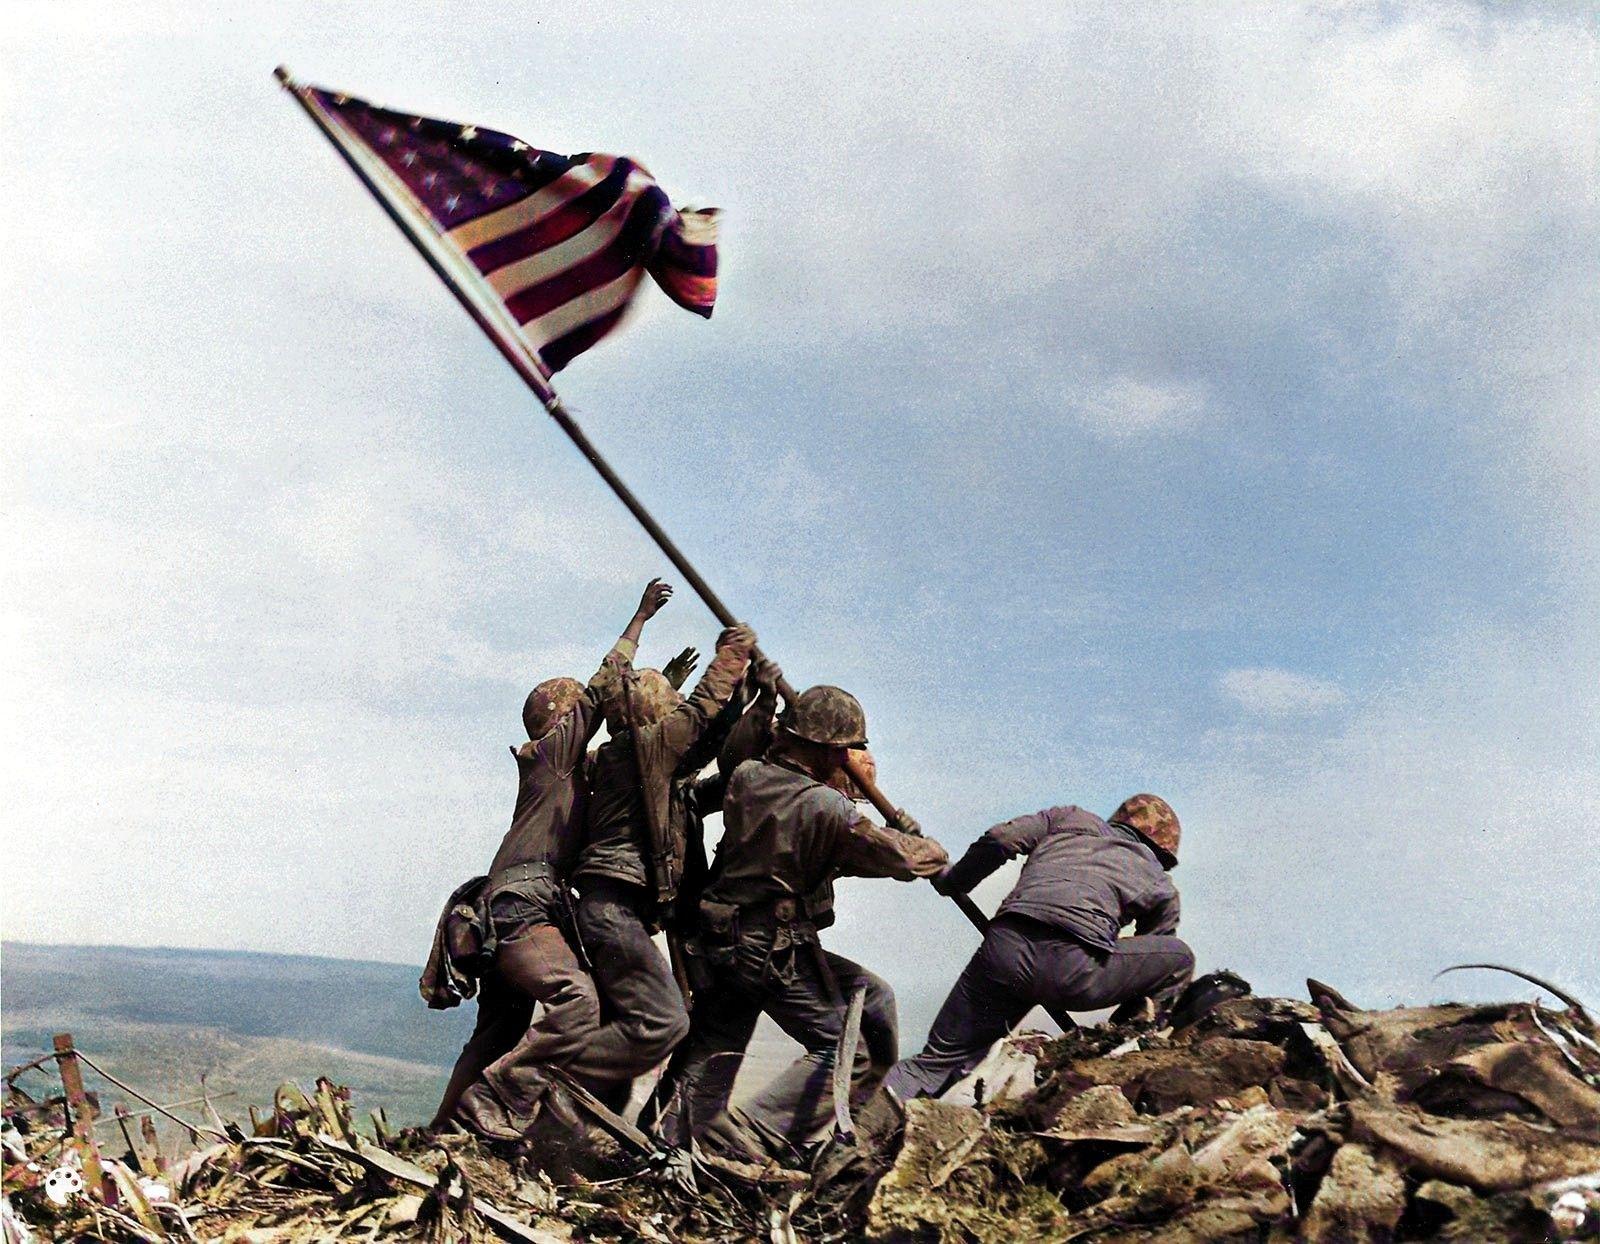 Raising the American flag. This iconic photo was reproduced as a war memorial sculpture and a postage stamp